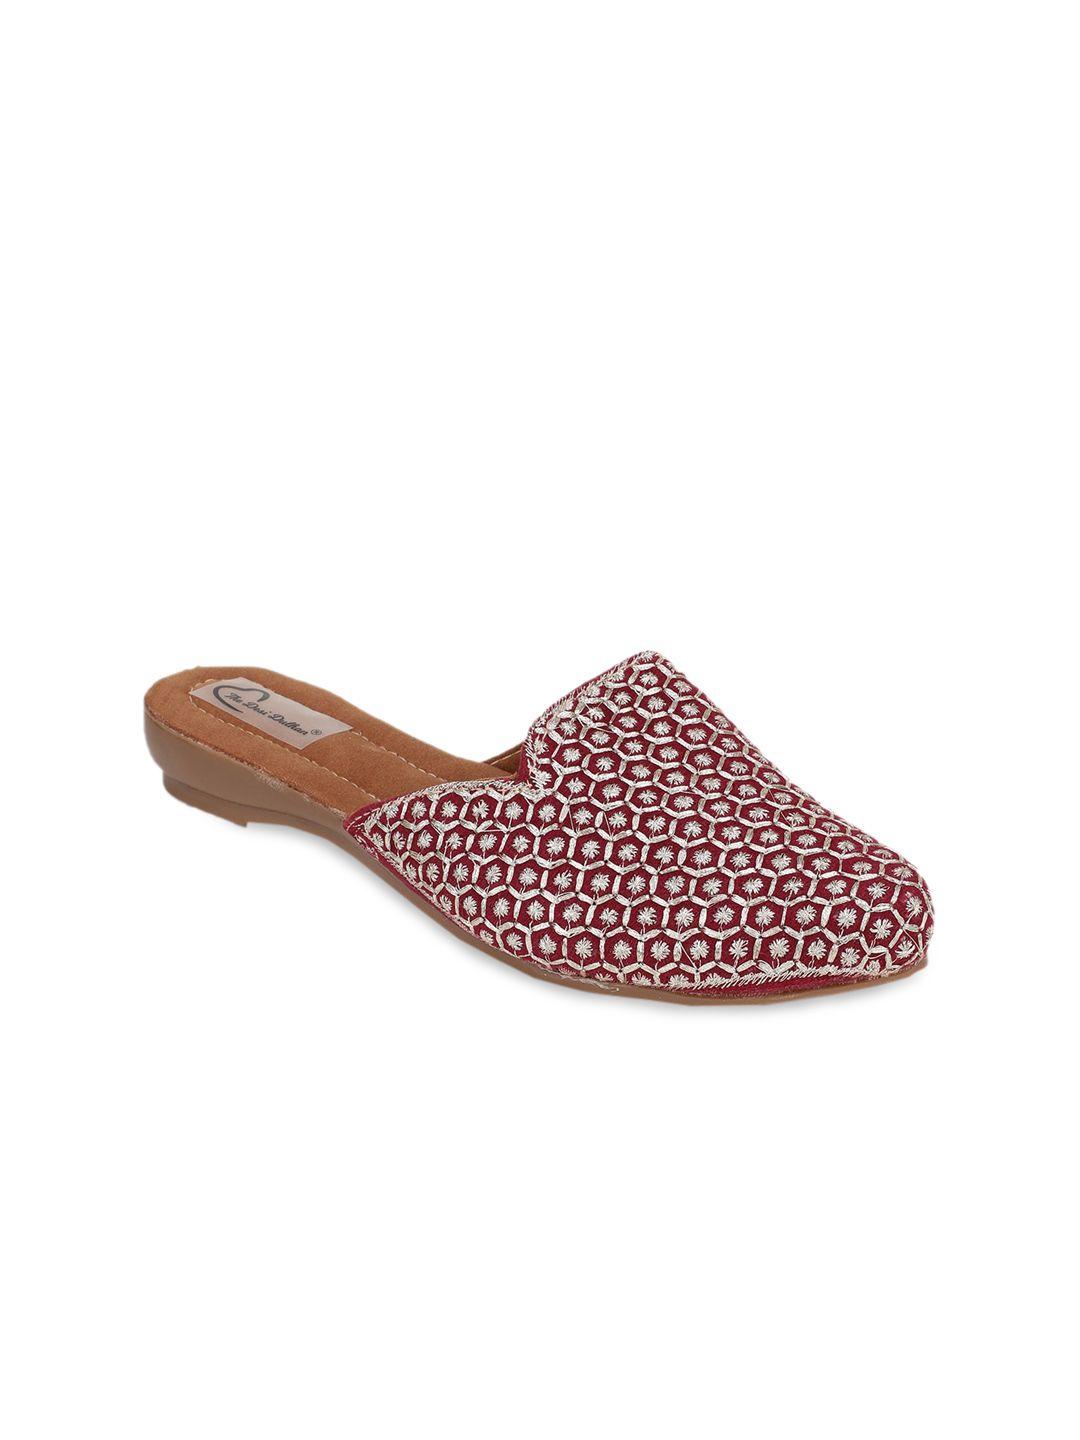 the-desi-dulhan-women-red-embellished-leather-ethnic-flats